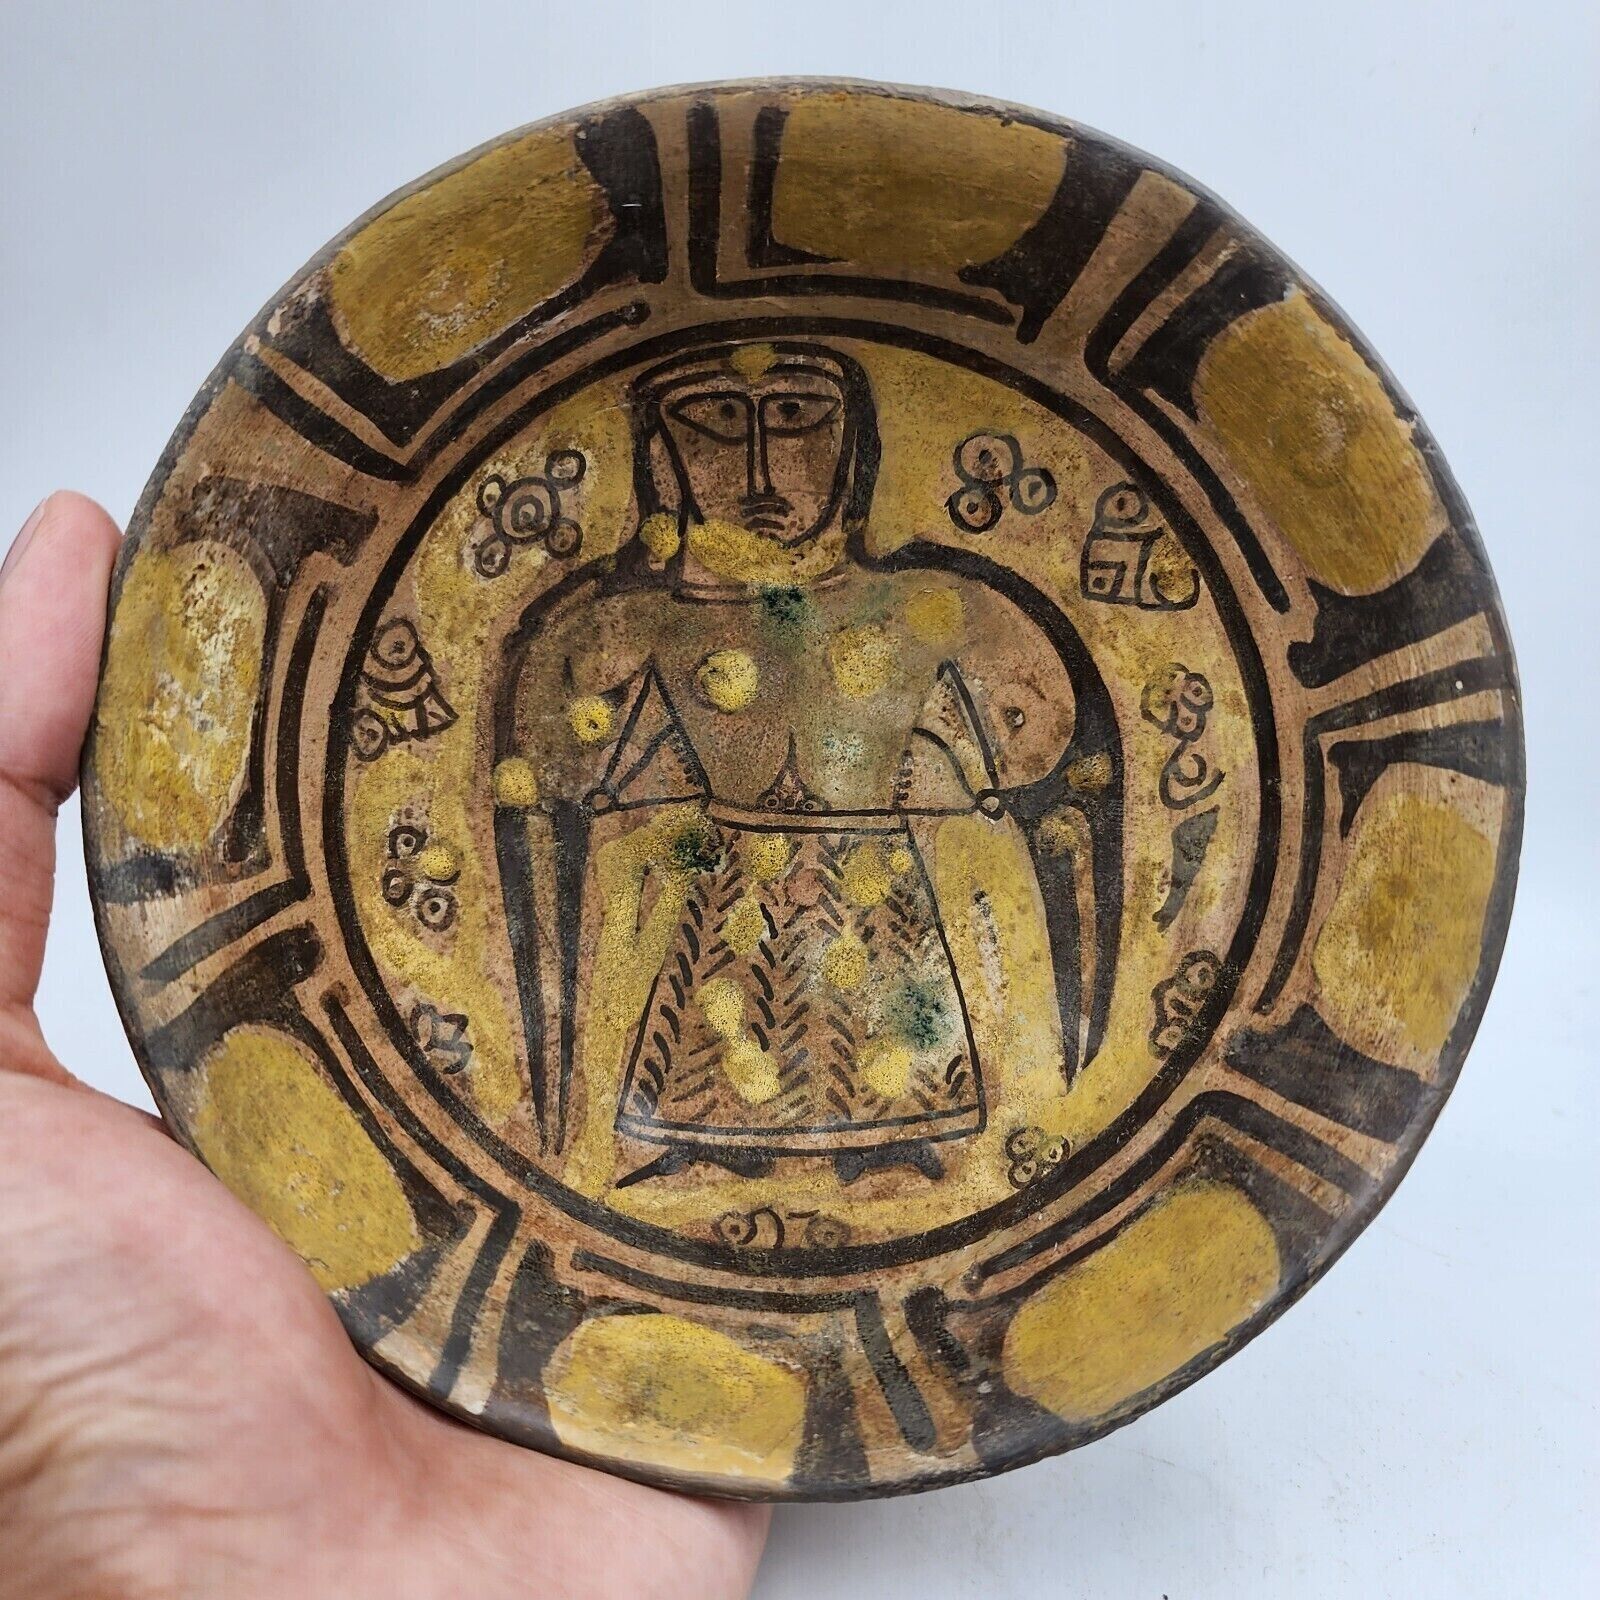 A VERY FINE AND IMPORTANT NISHAPUR PAINTED CERAMIC GLAZED BOWL. YELLOW PAINTED